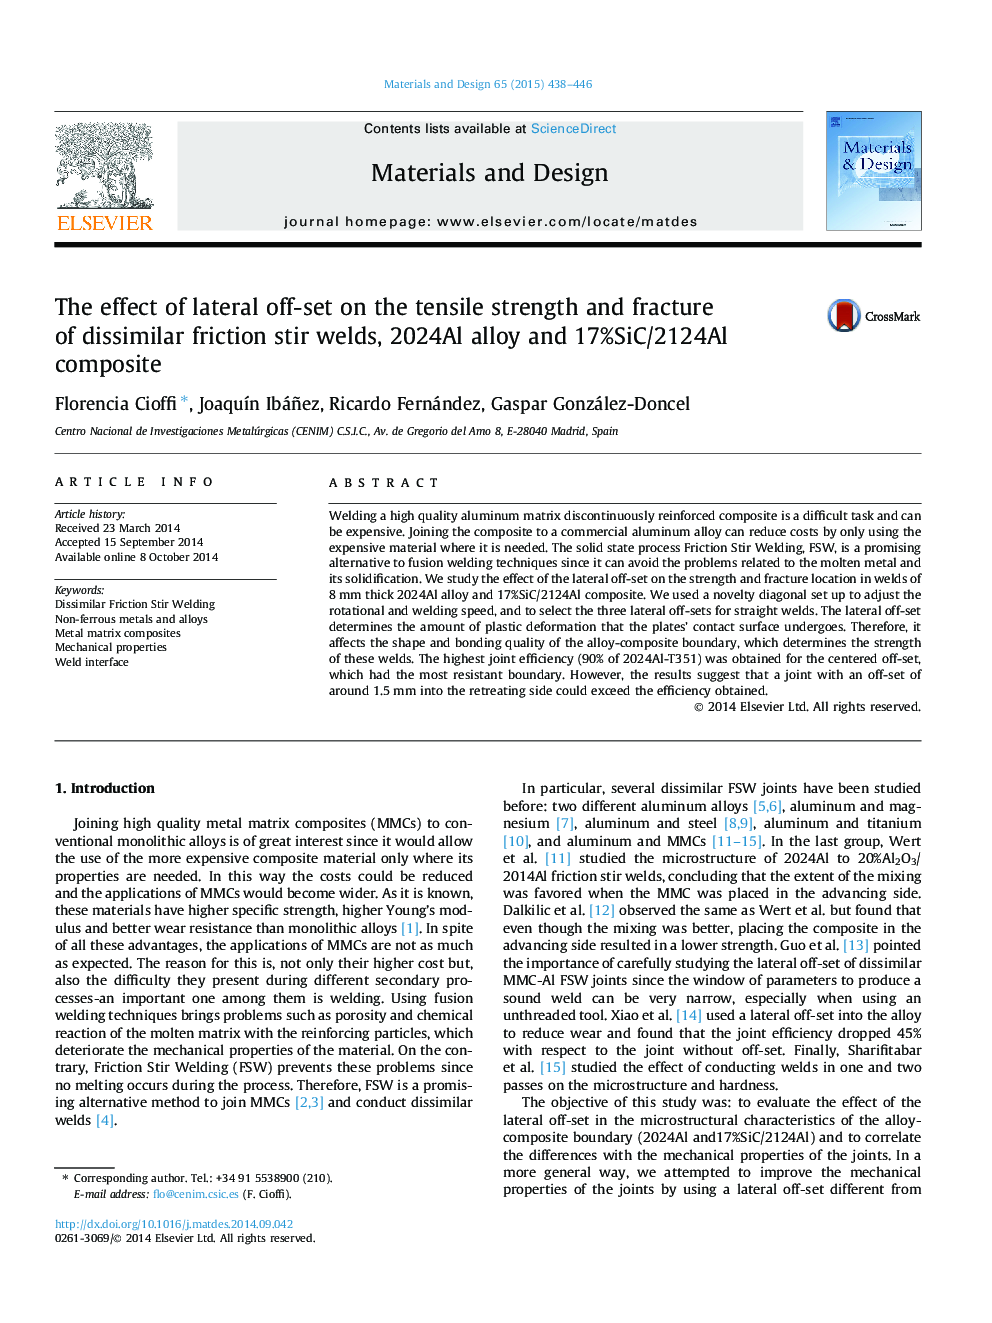 The effect of lateral off-set on the tensile strength and fracture of dissimilar friction stir welds, 2024Al alloy and 17%SiC/2124Al composite